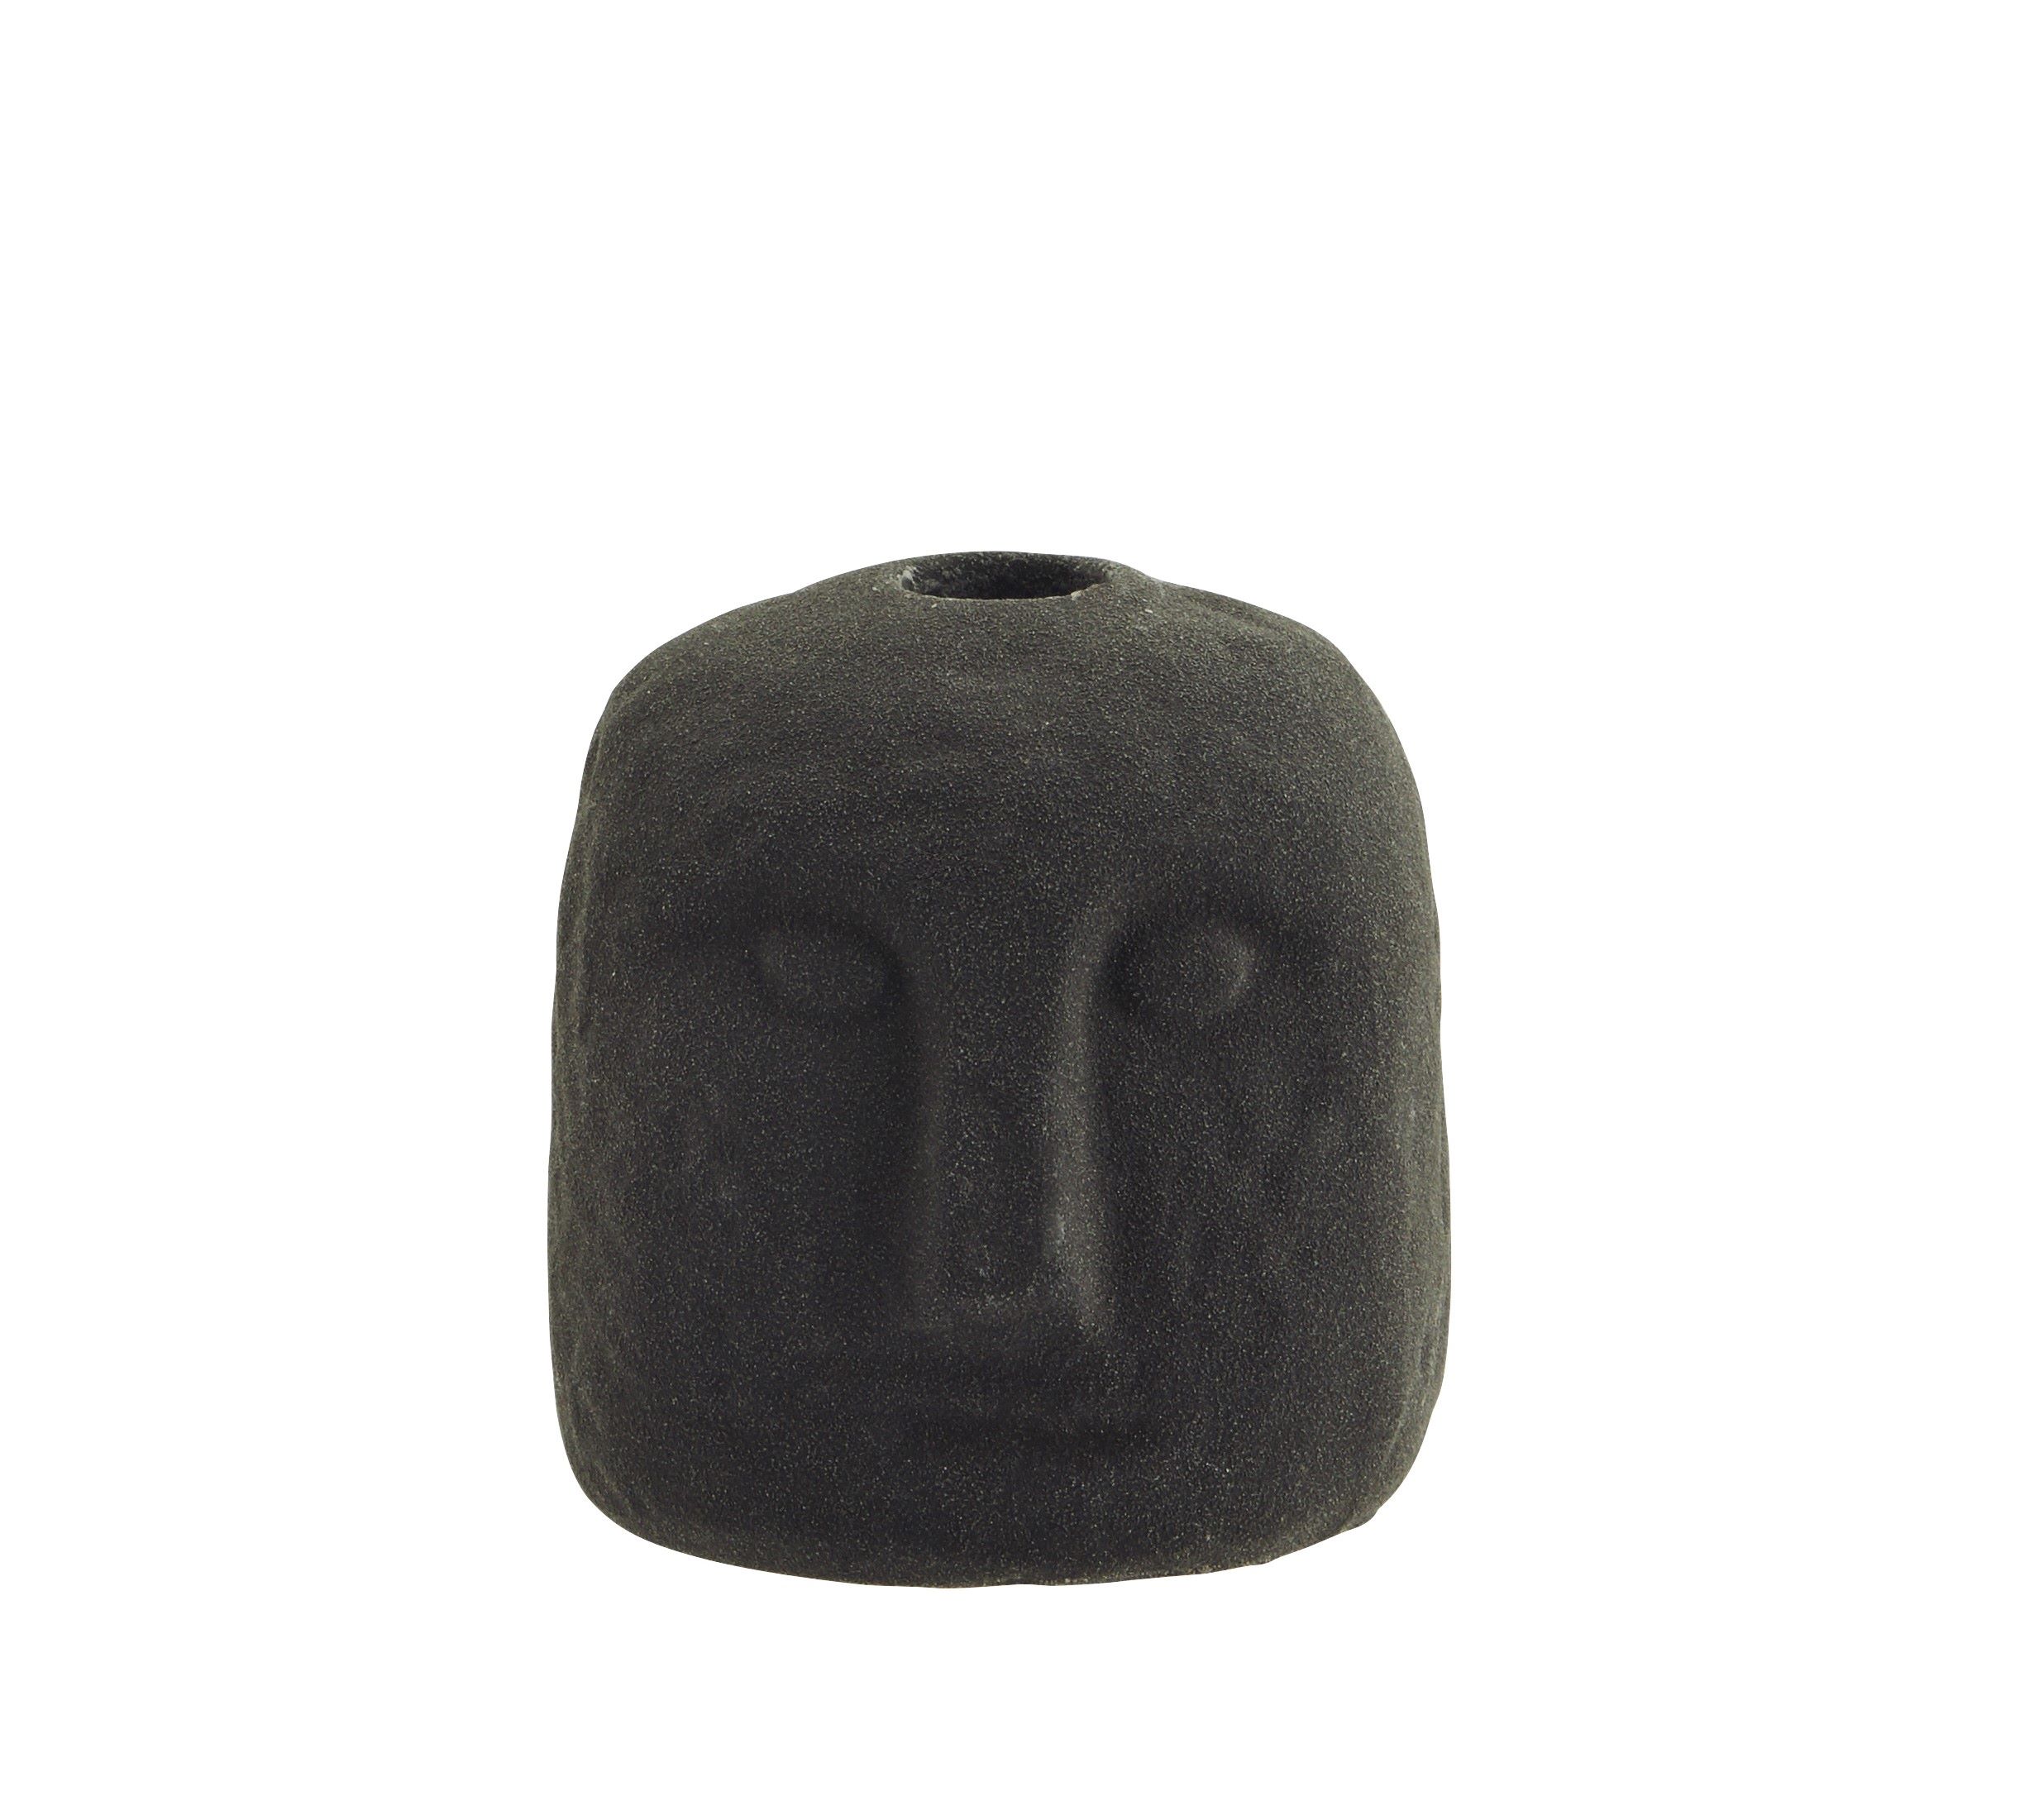 Madam Stoltz Black Candle Holder with Face Impression